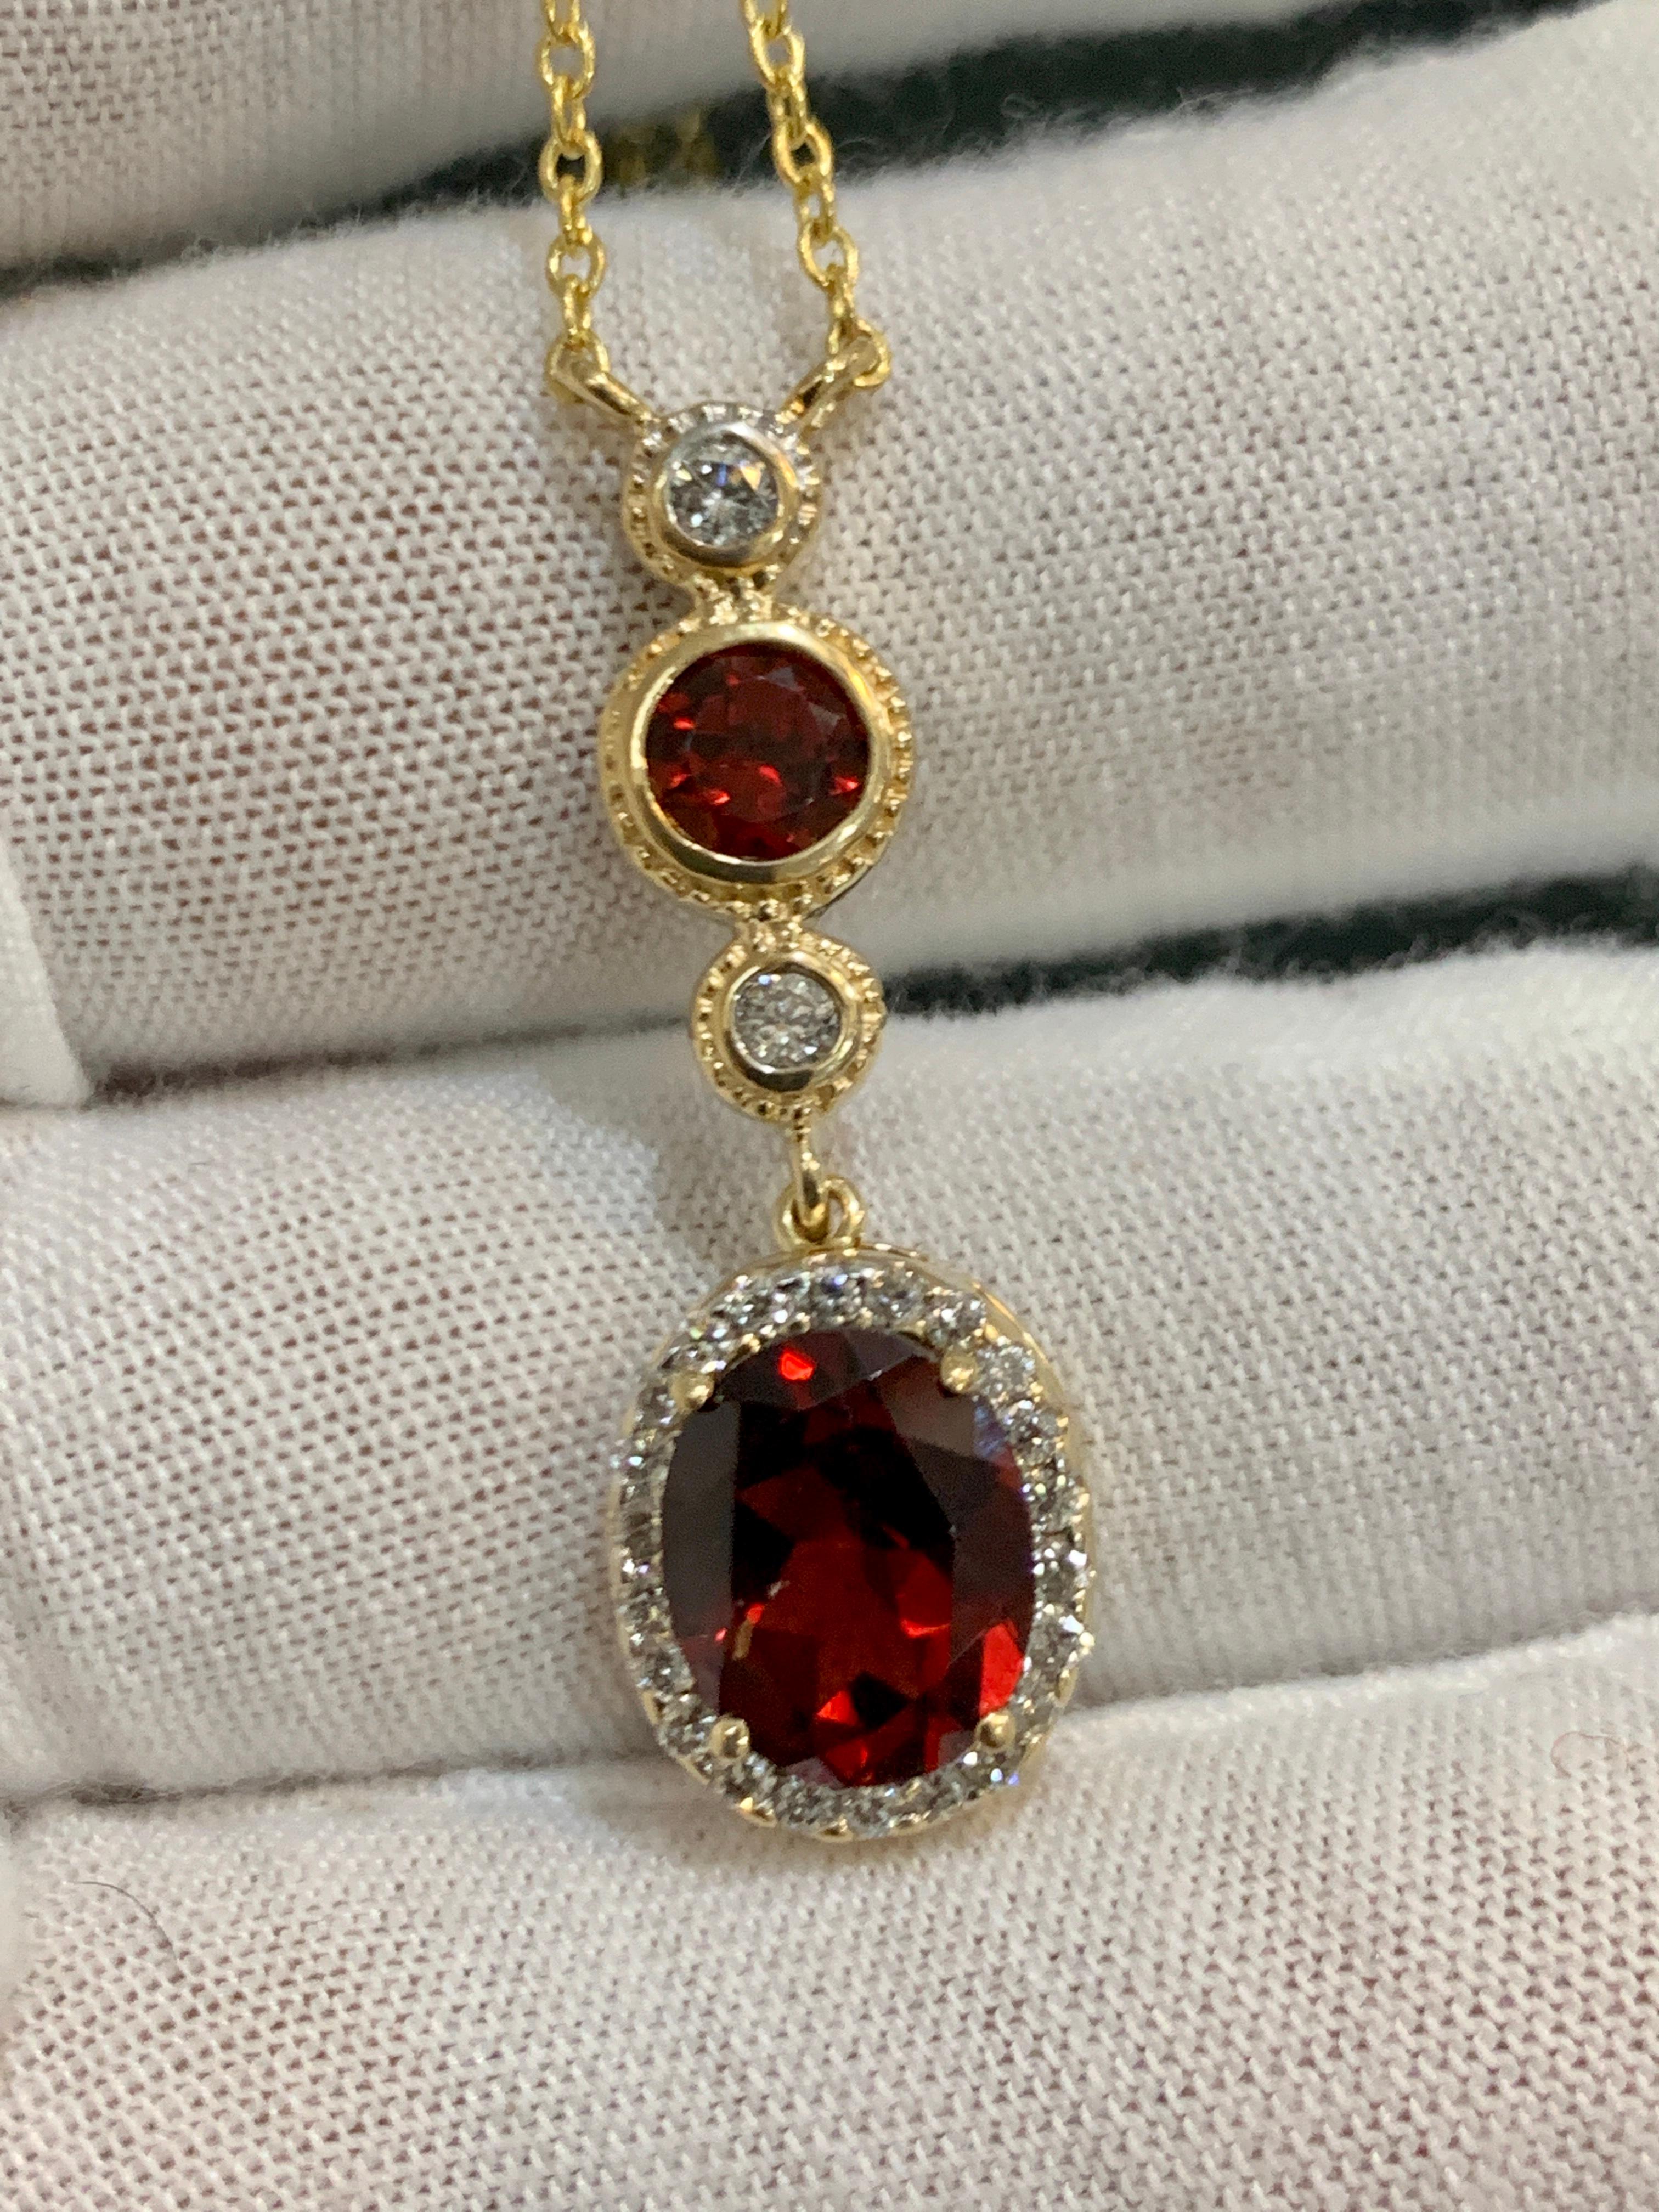 6 Carat Oval Shape Garnet and 0.6 Carat Diamond Necklace in 14 Karat Yellow Gold In Excellent Condition For Sale In New York, NY